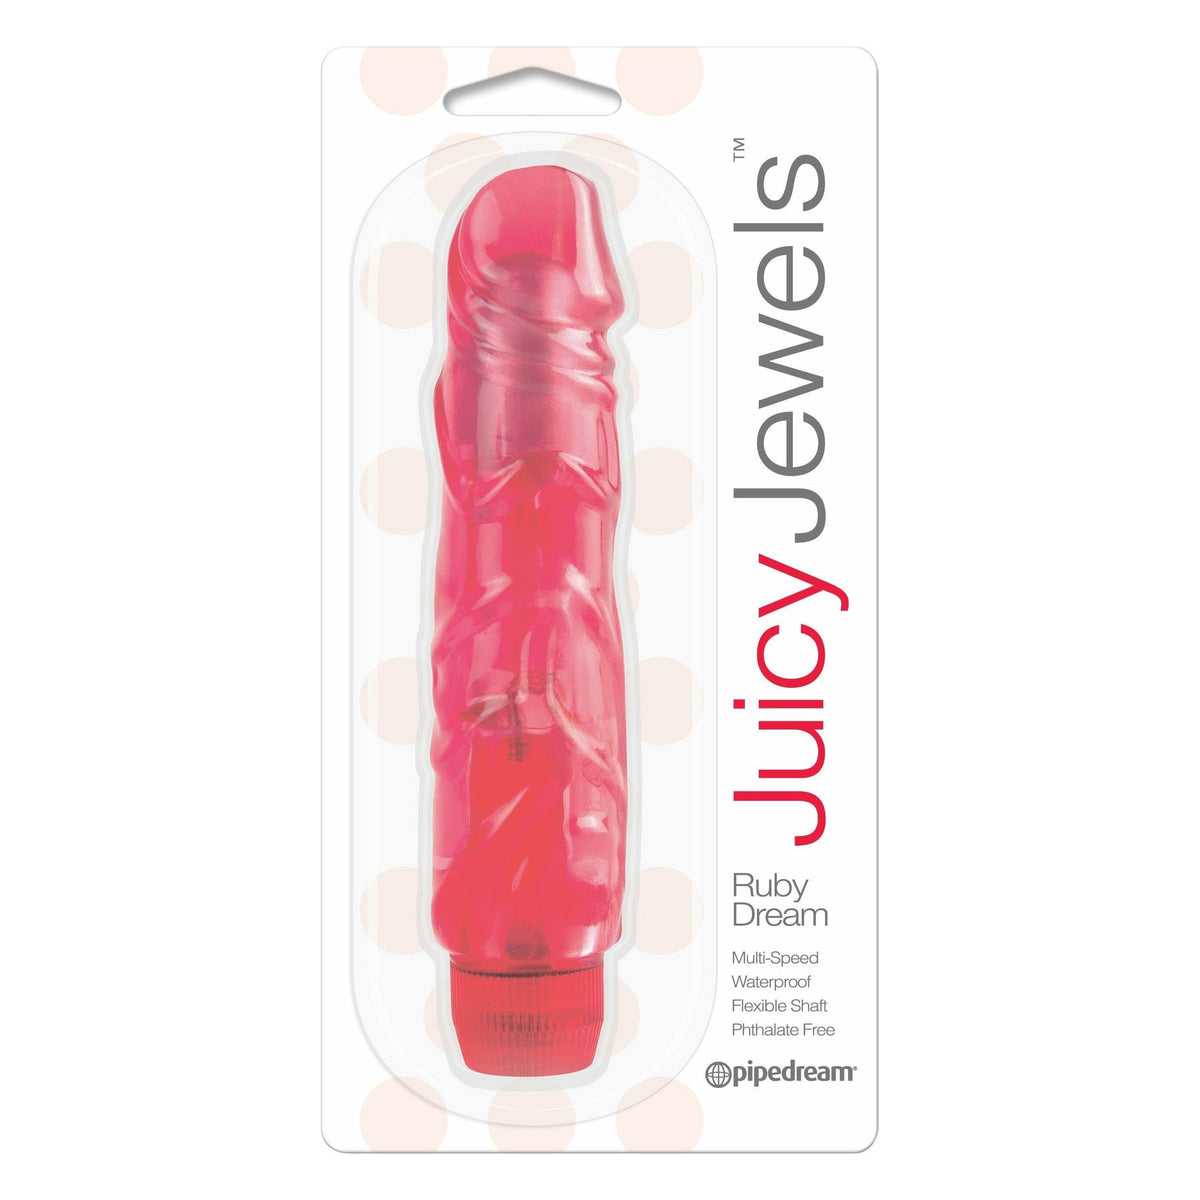 Pipedream Products Juicy Jewels Ruby Dream Vibe Red